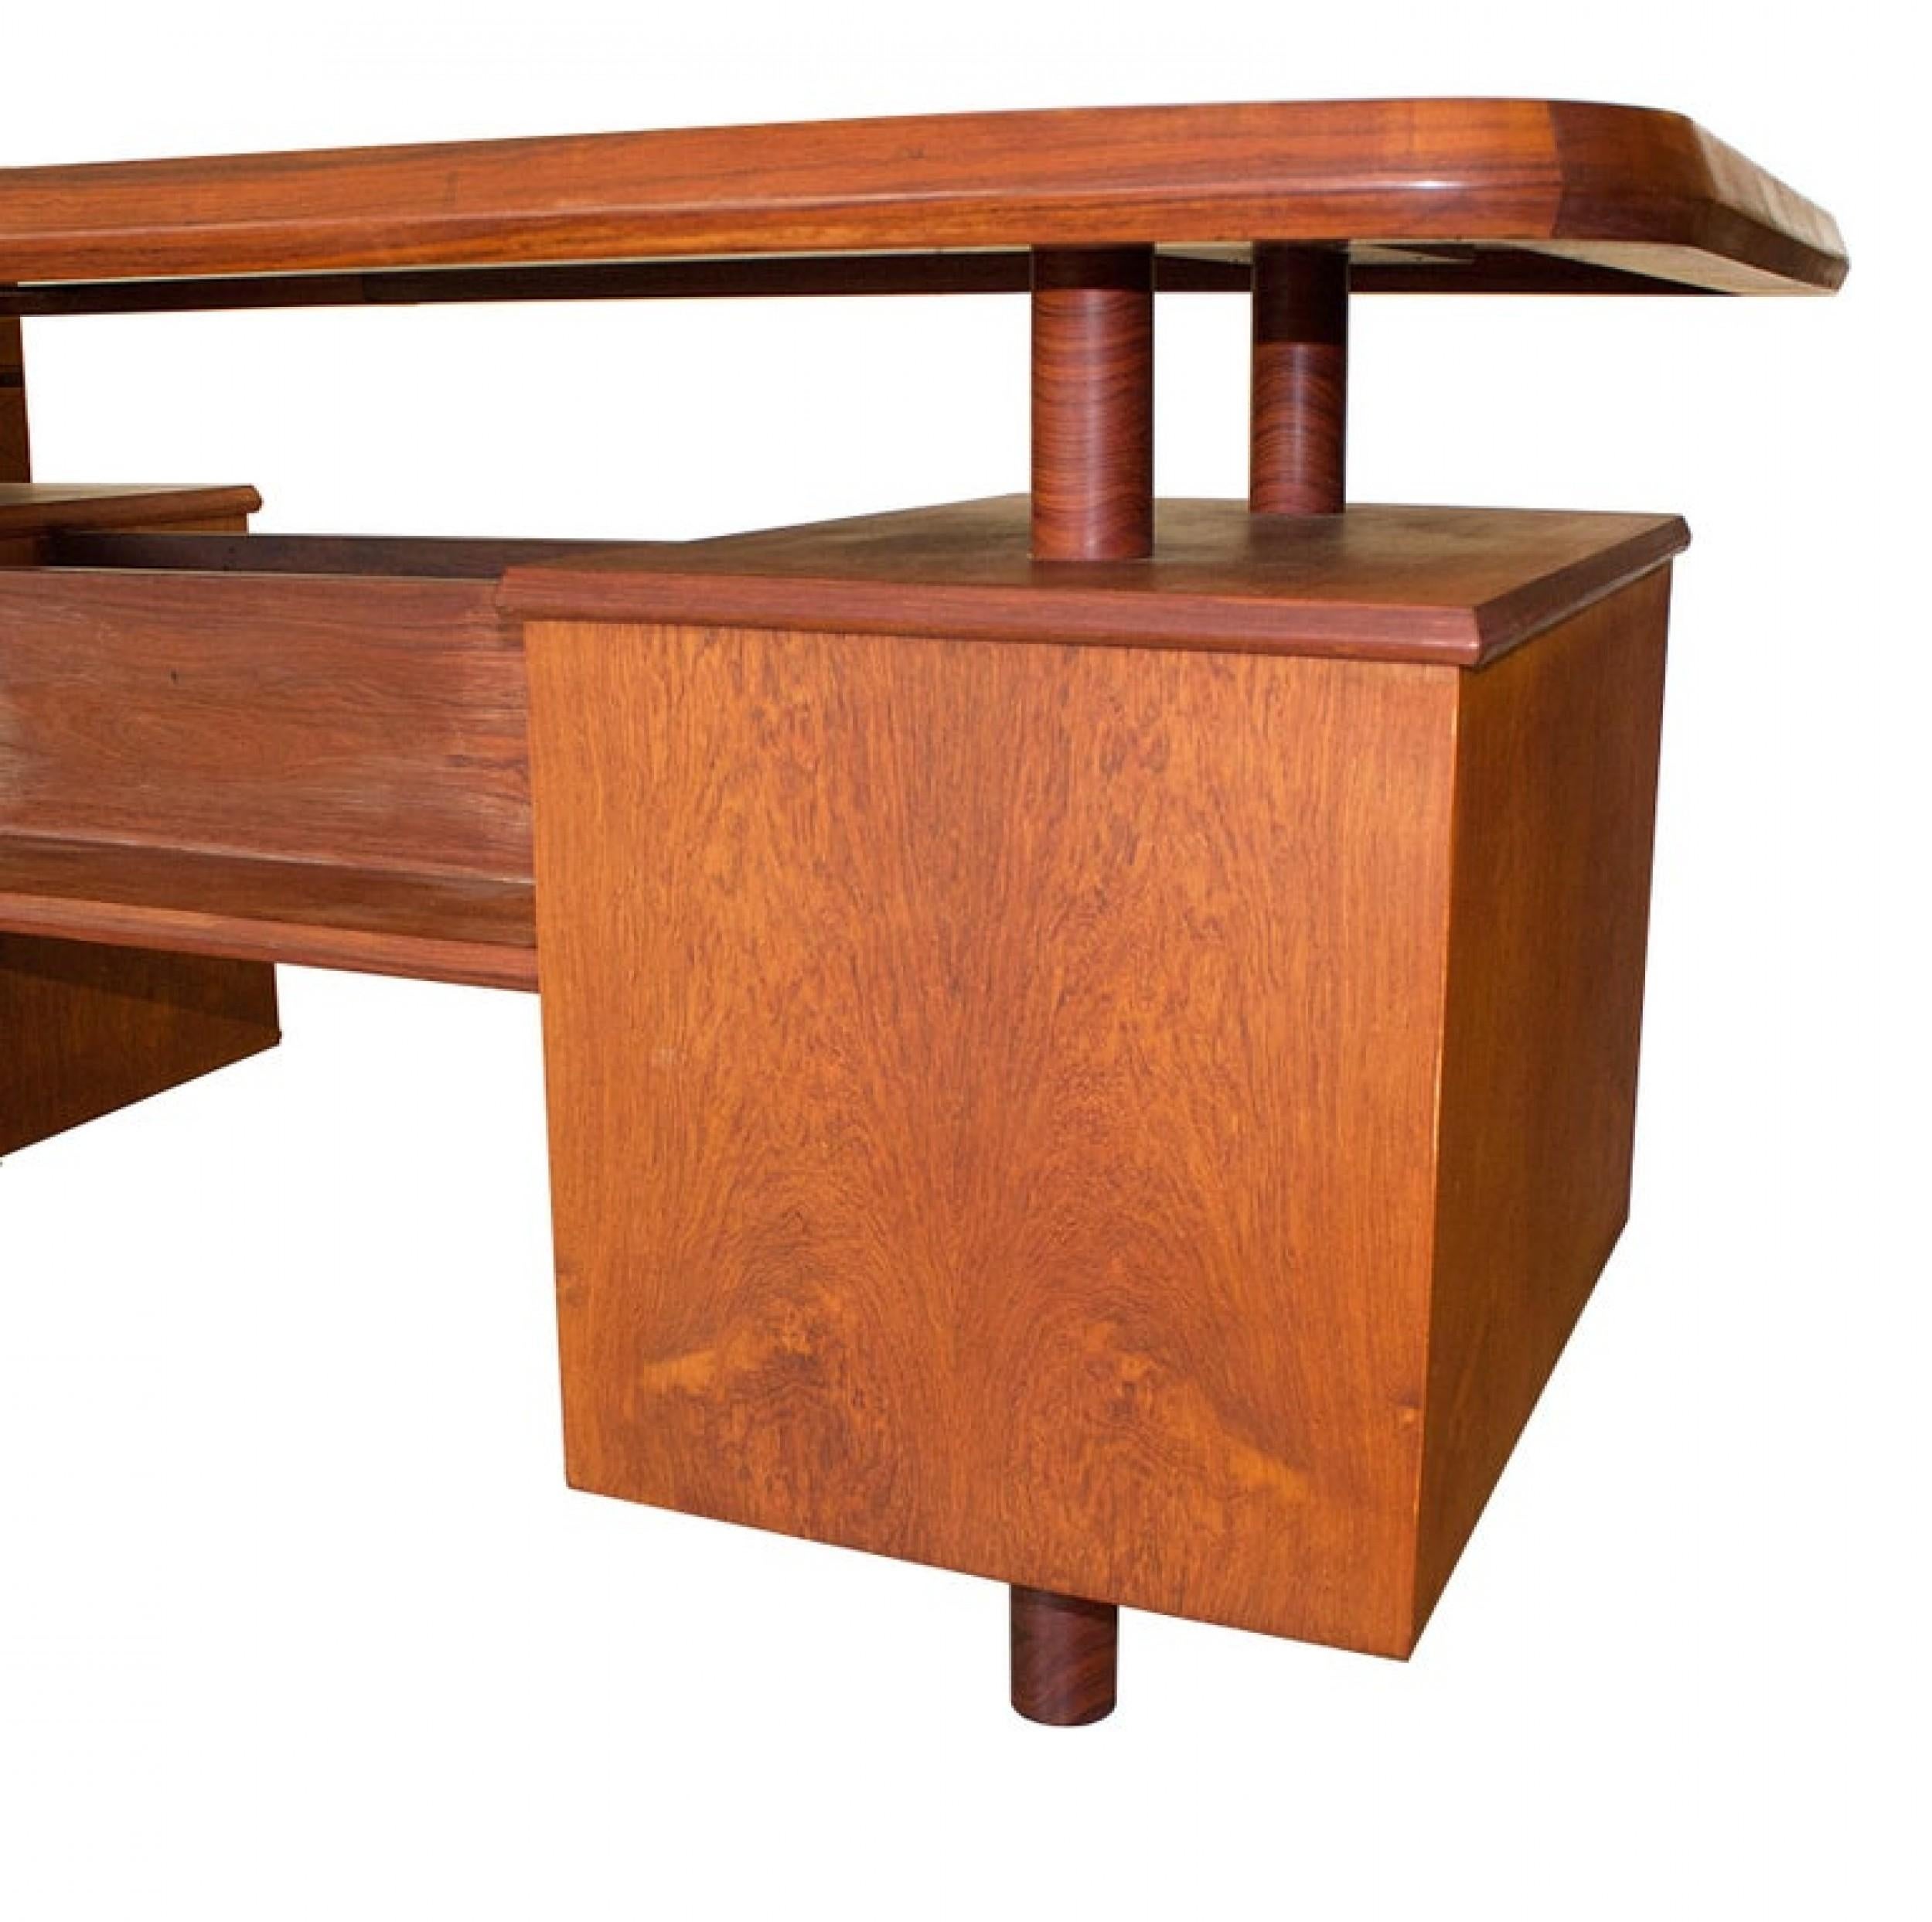 Unique French Modern Solid Rosewood Desk, Pierre Chapo, 1950s In Good Condition For Sale In New York, NY